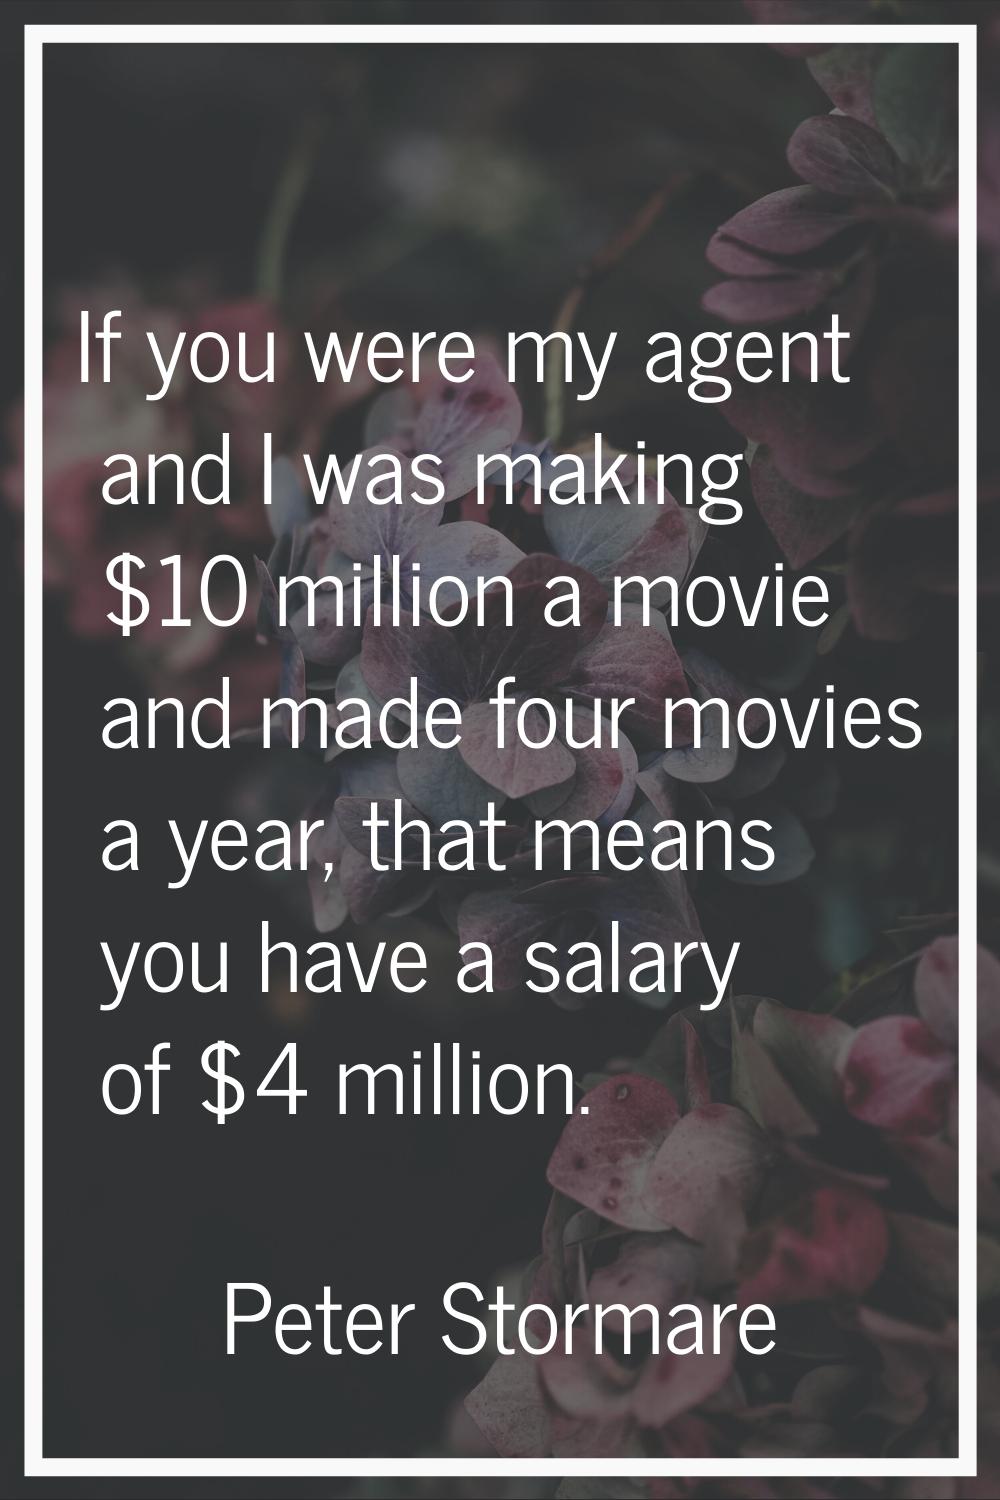 If you were my agent and I was making $10 million a movie and made four movies a year, that means y